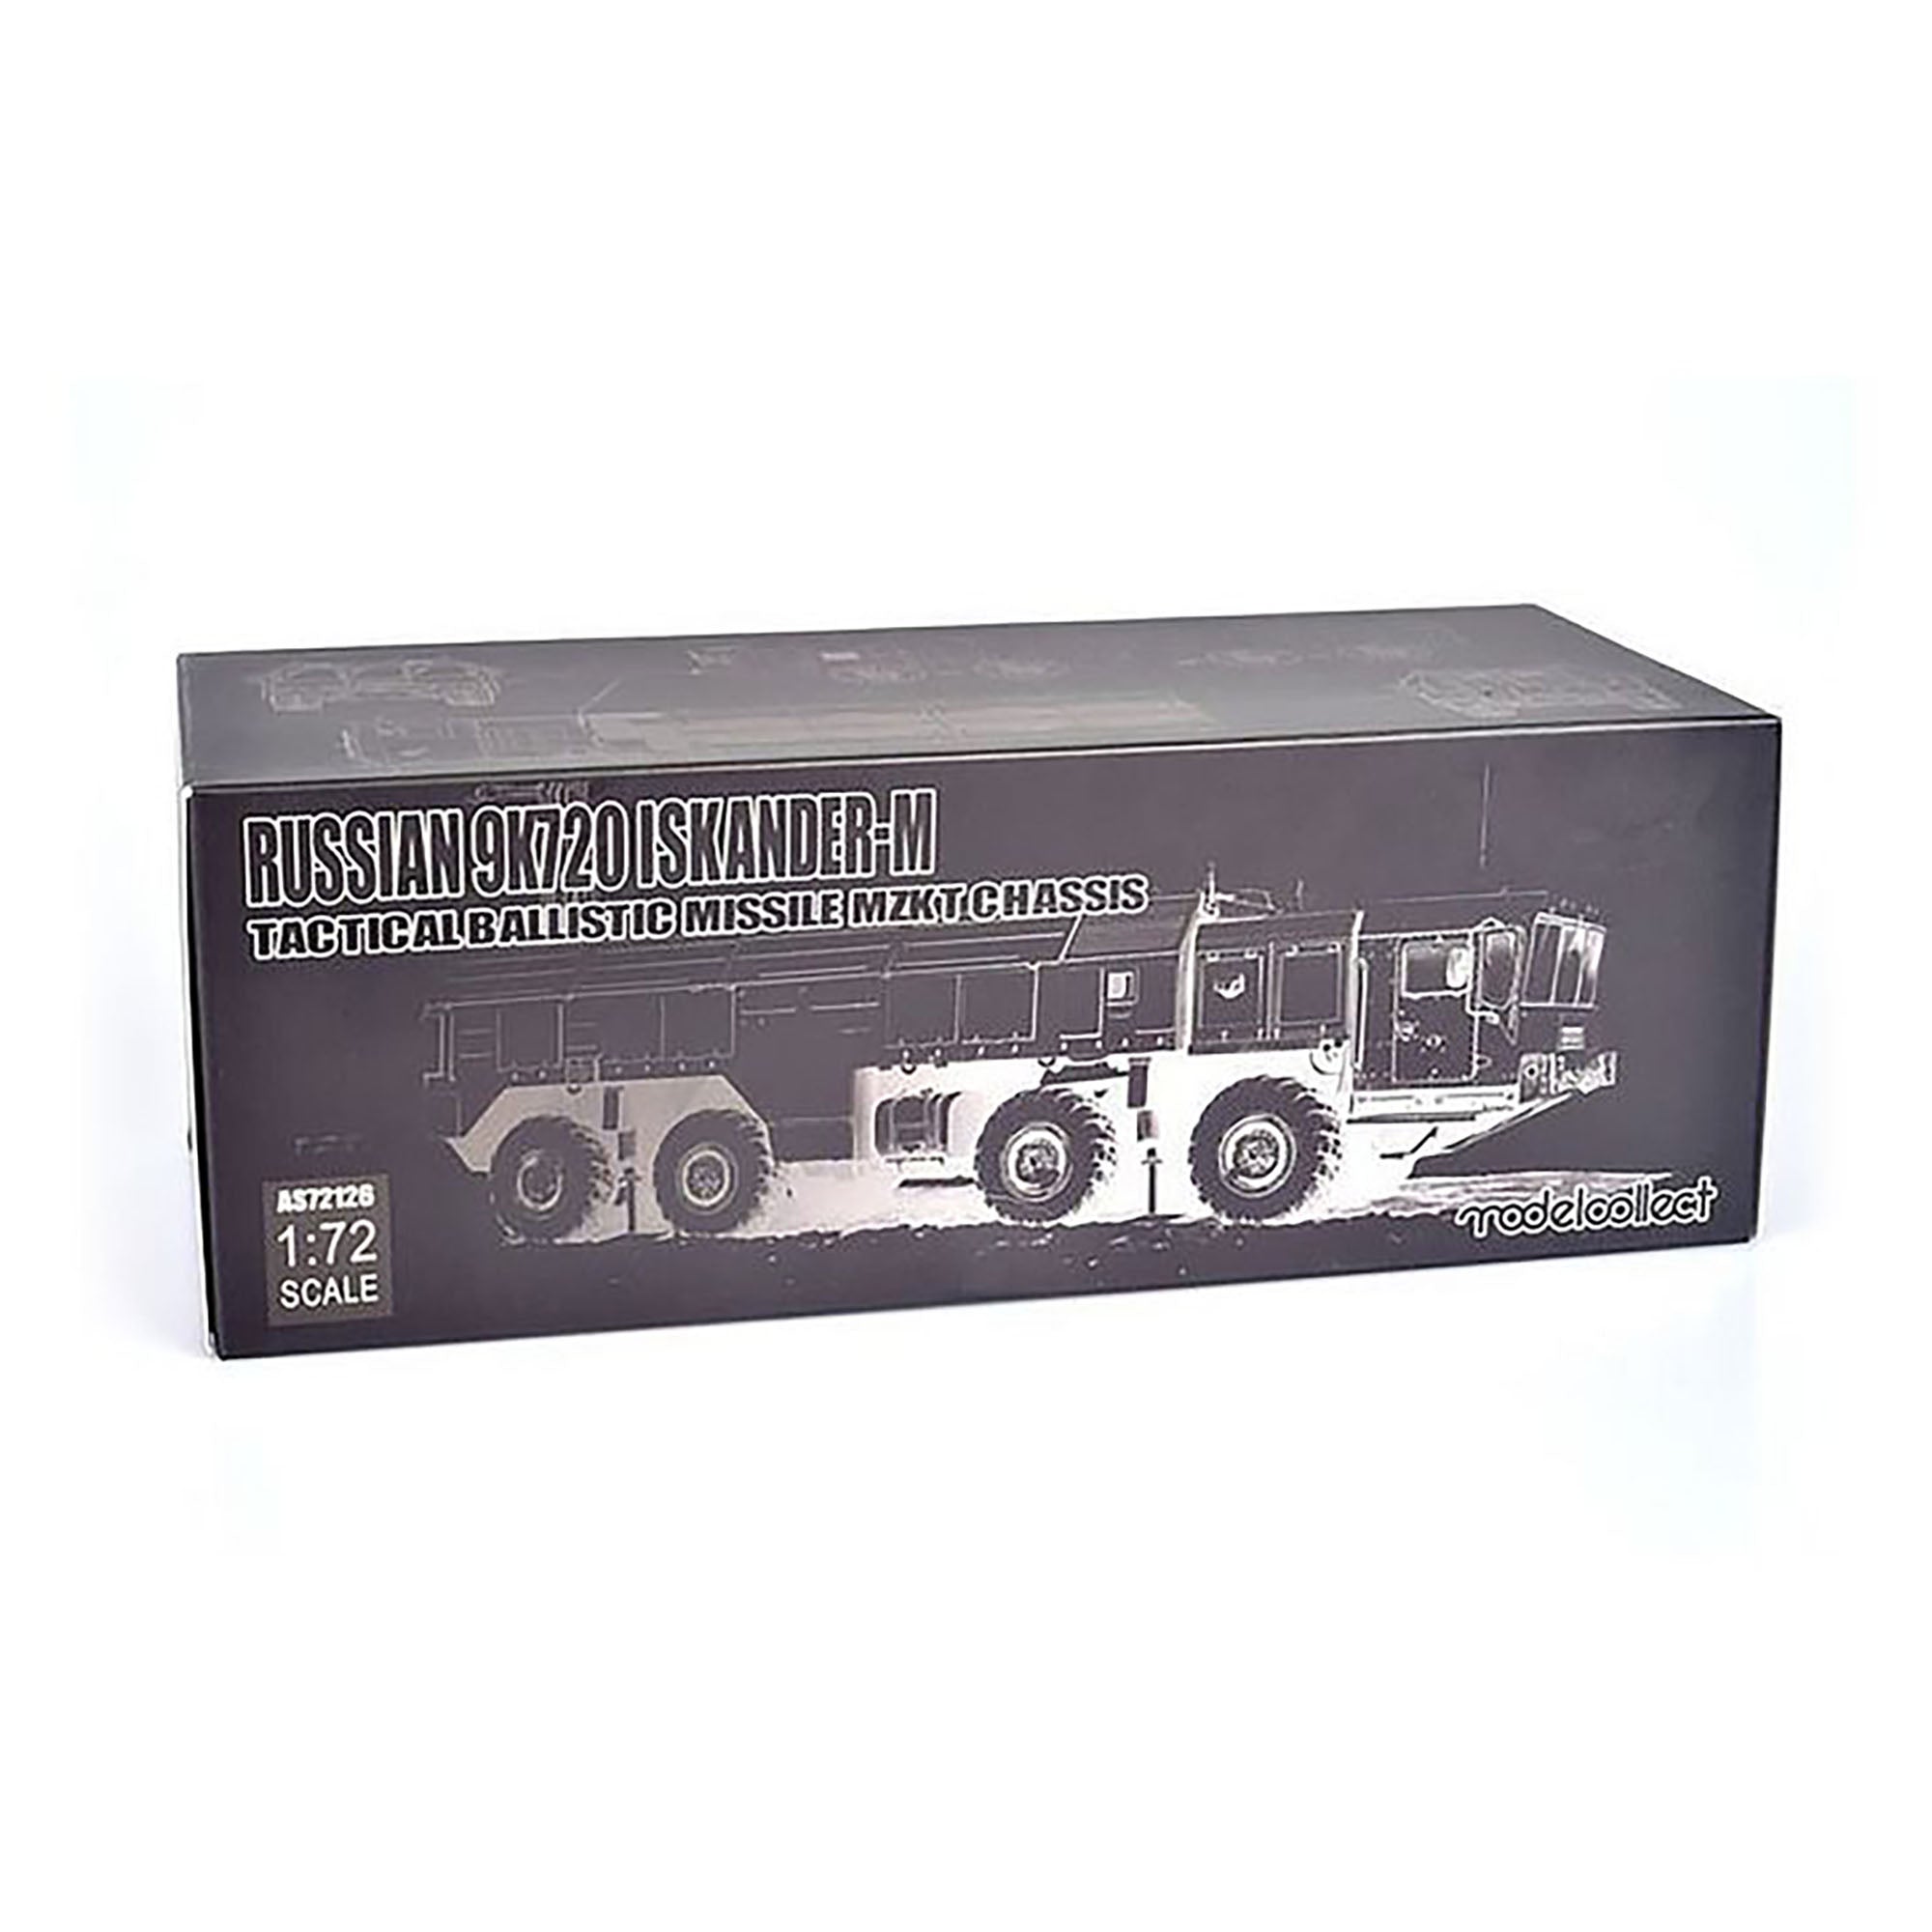 Modelcollect AS72126 1/72 Russian 9K720 Iskander-M Tactical Ballistic Missile MZKT Chassis Model Kit 2